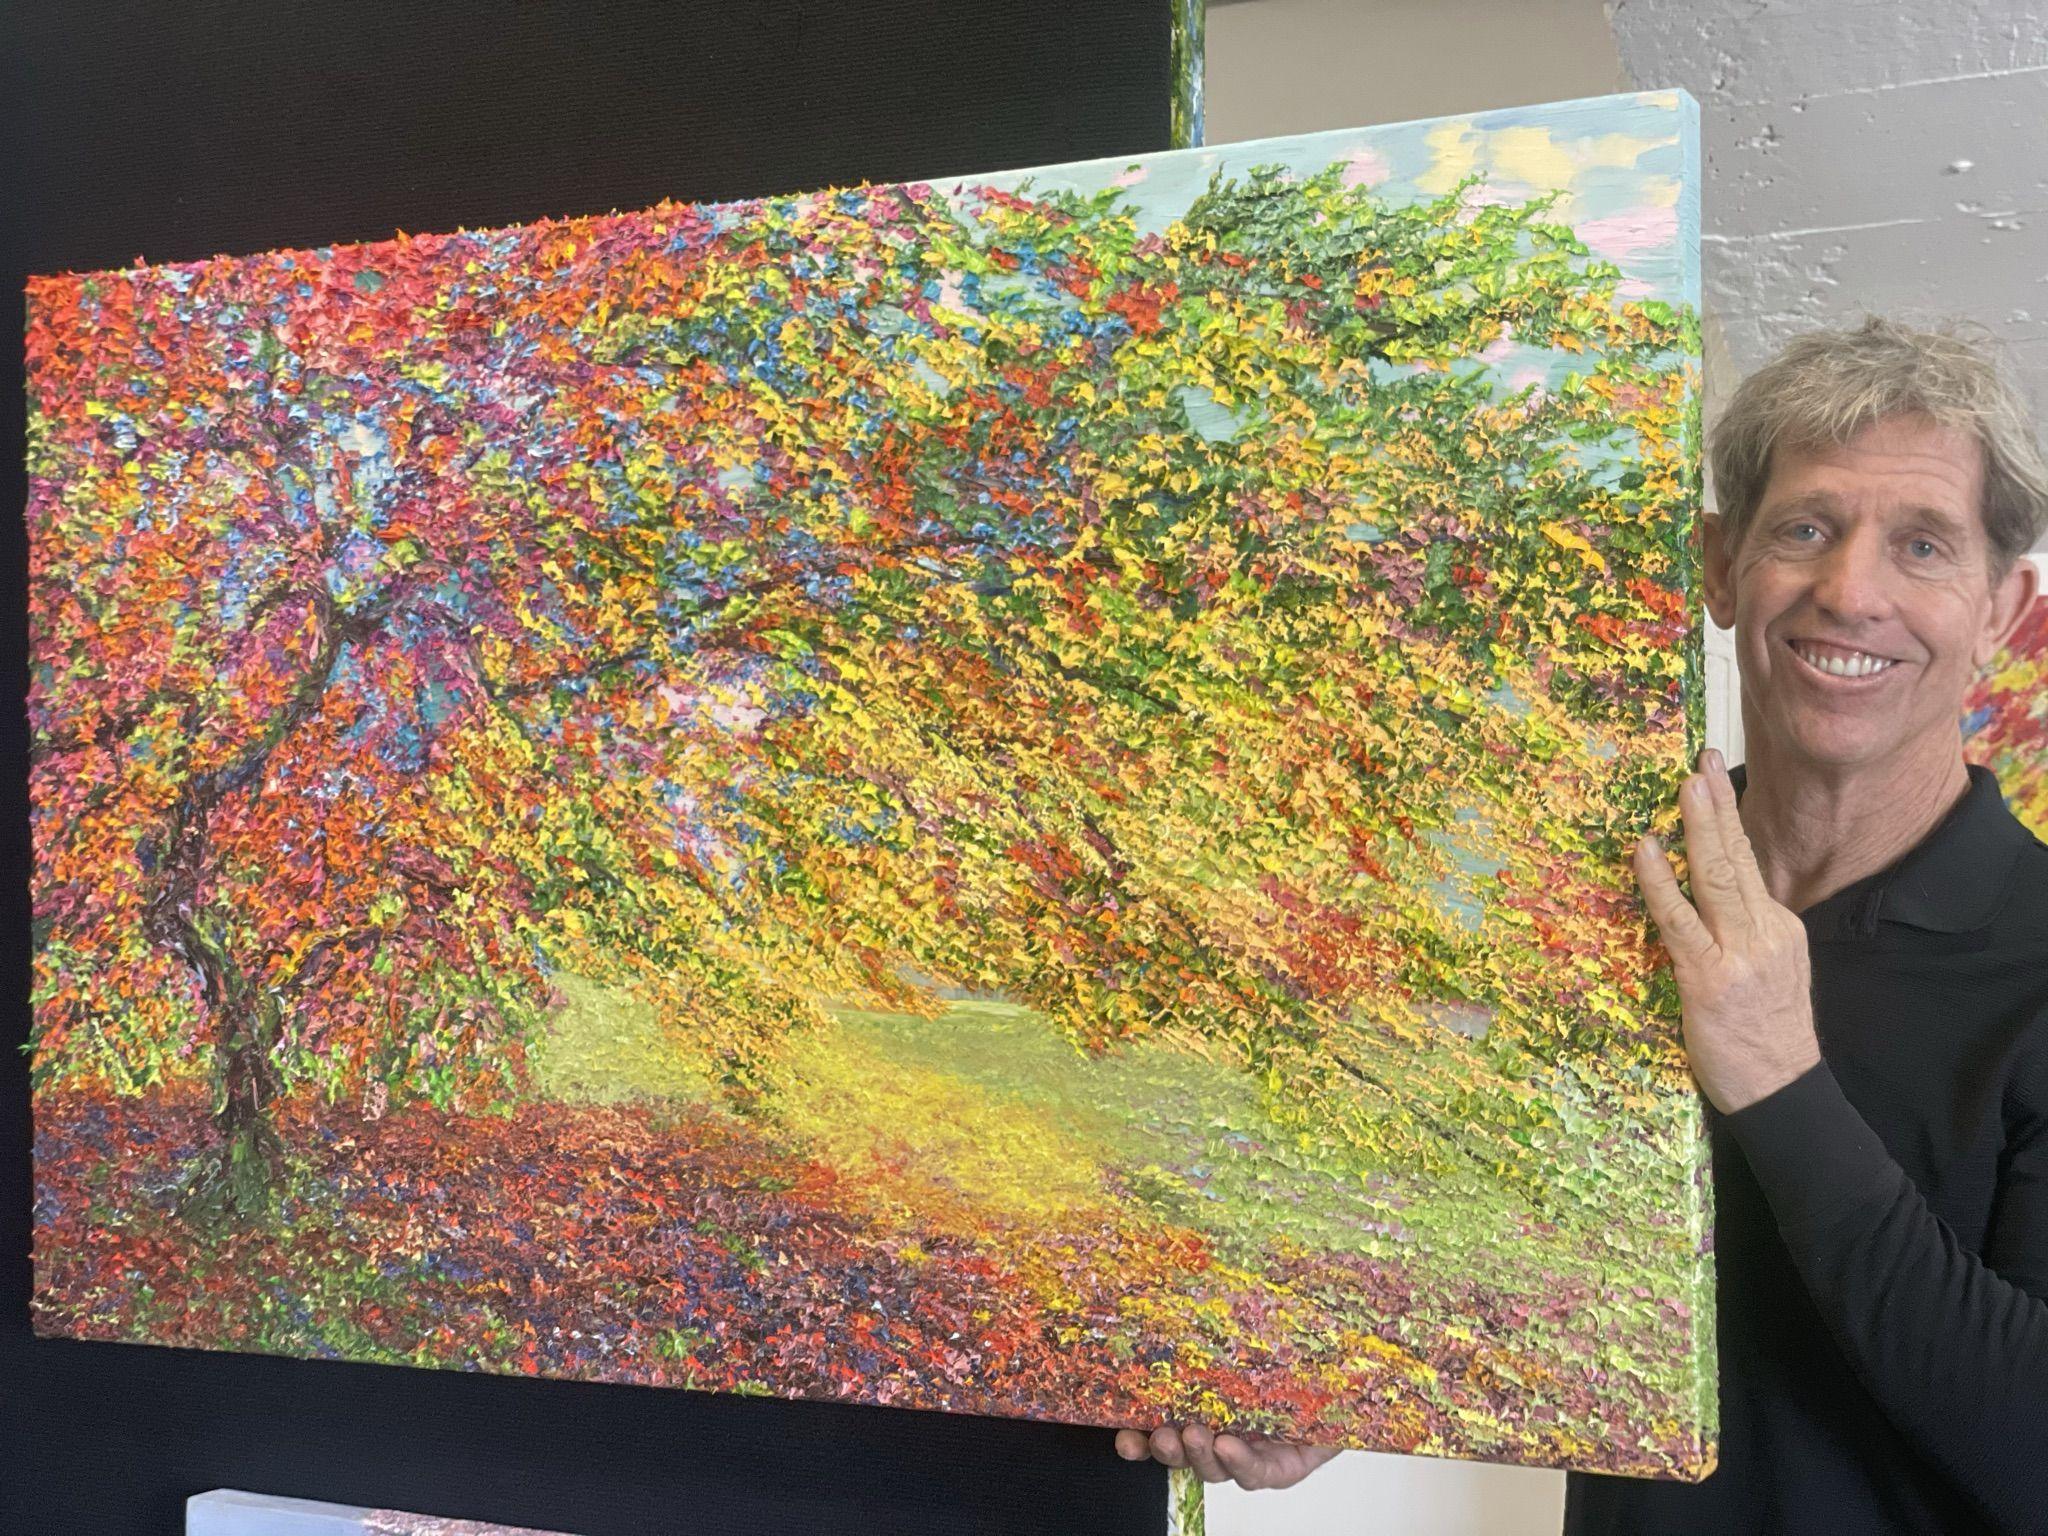 This painting is a kaleidoscope of color as the twisted limbs of an ancient tree almost seem to present four seasons in one frame.      The painting is executed in Clear Impressionism style in thick oils with bright colors, fluid motion, and